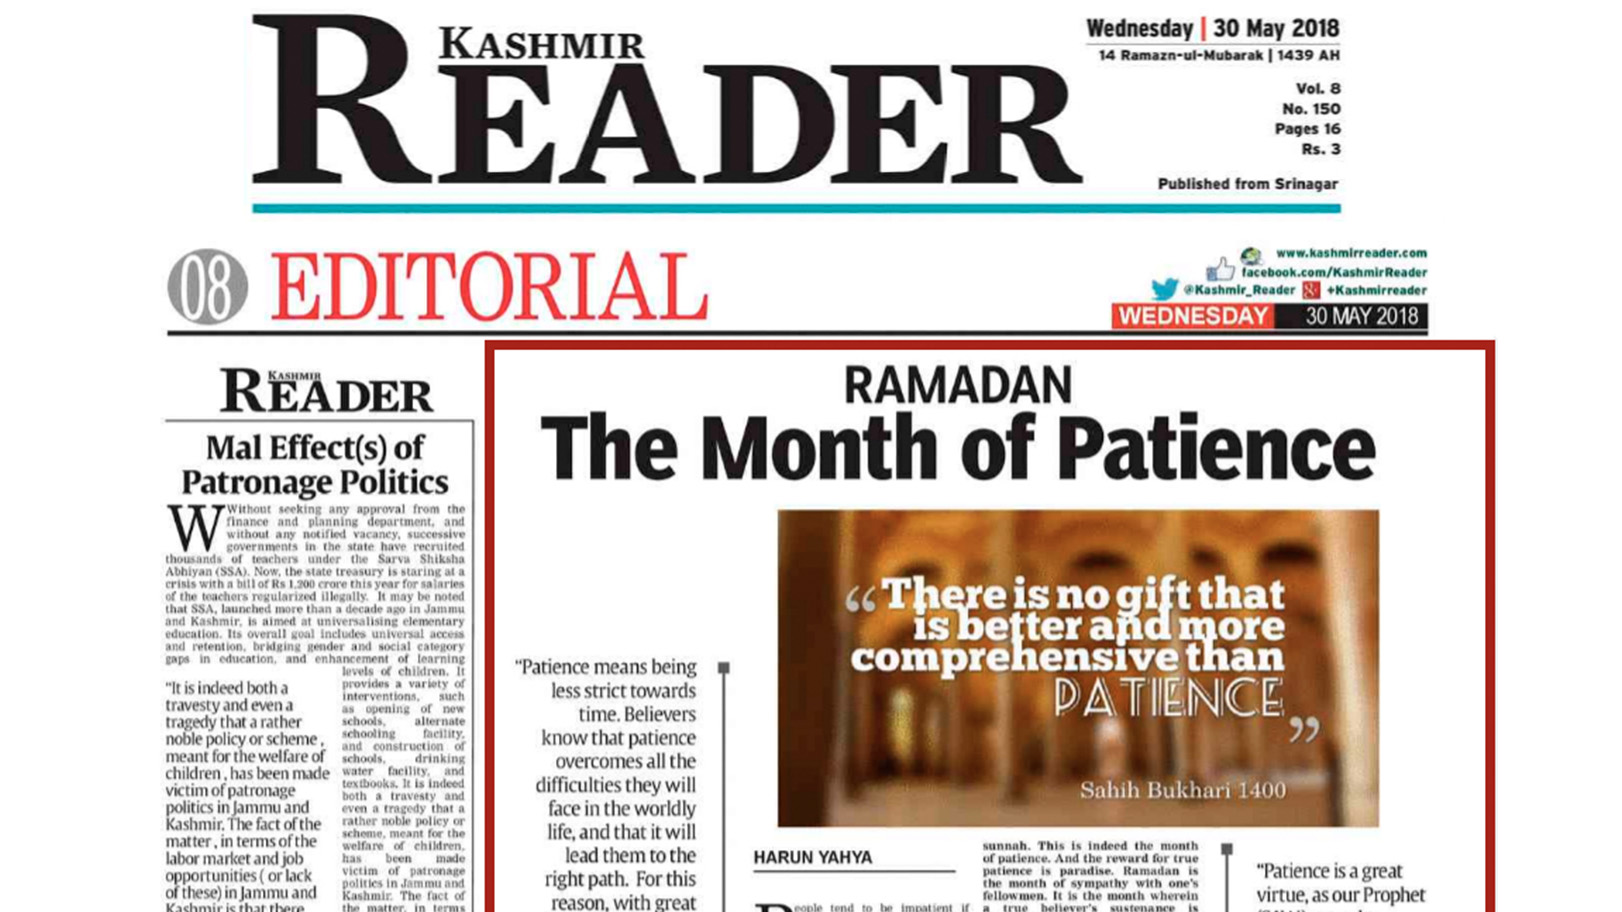 Ramadan: The Month of Patience